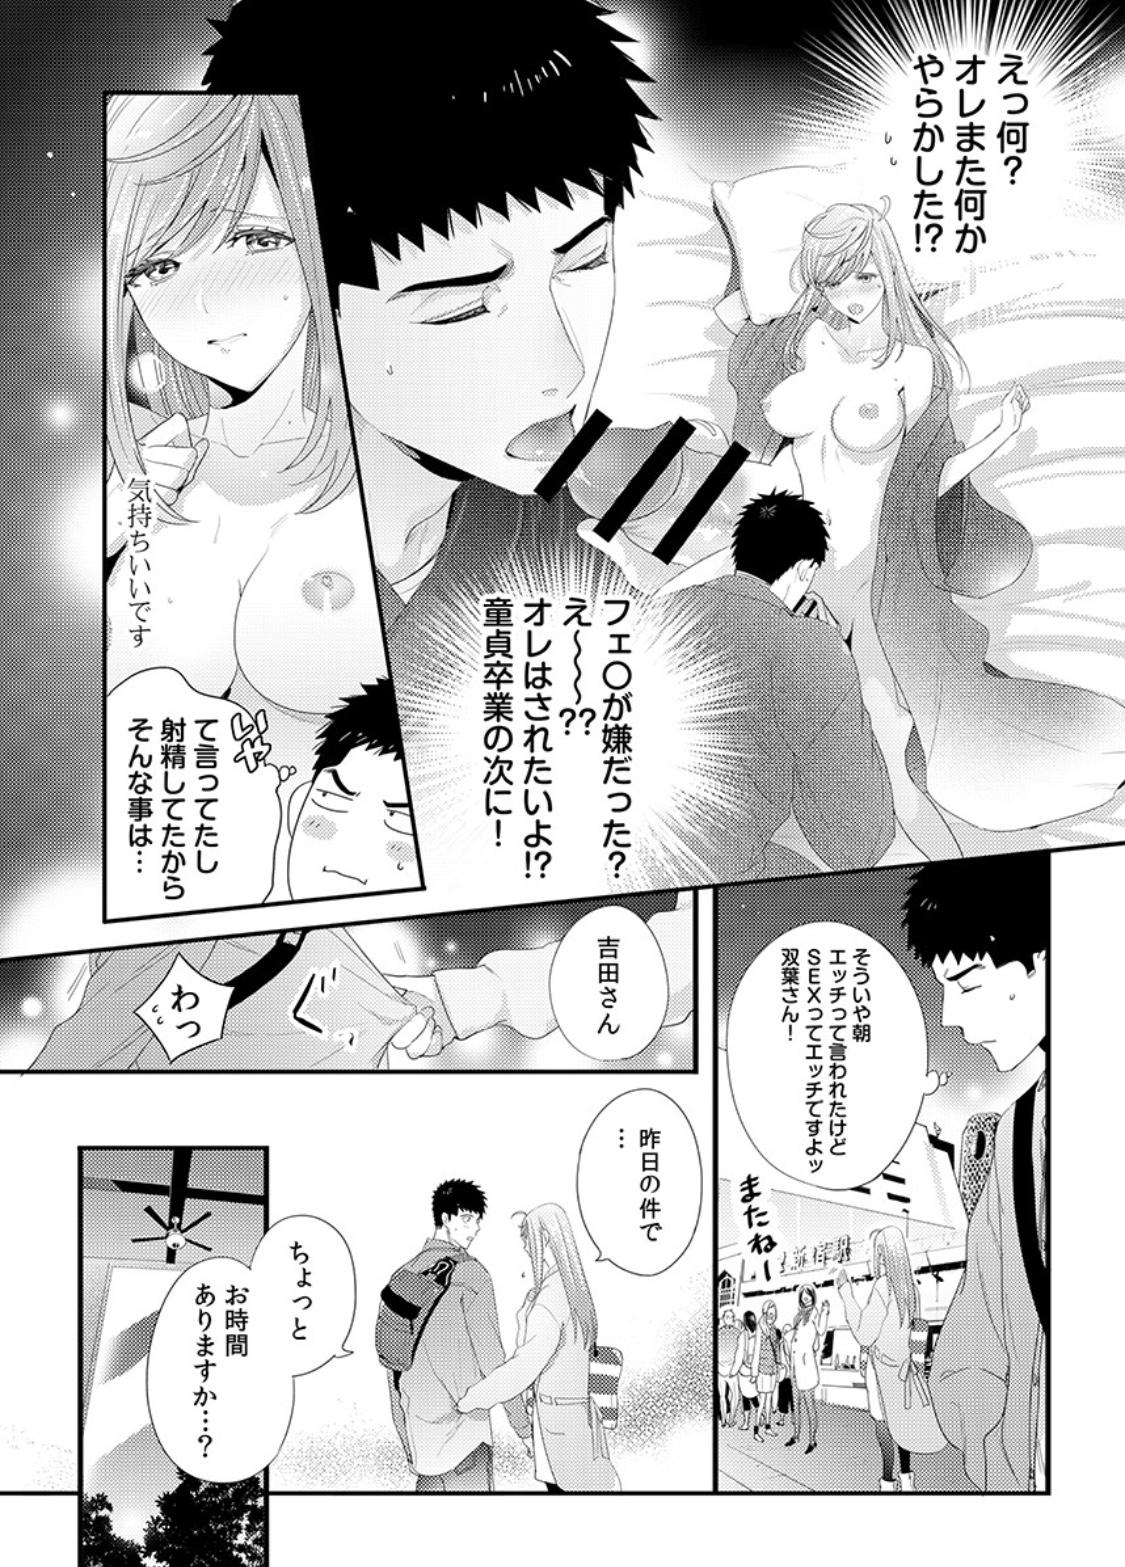 Please Let Me Hold You Futaba-San! Ch. 1+2 33